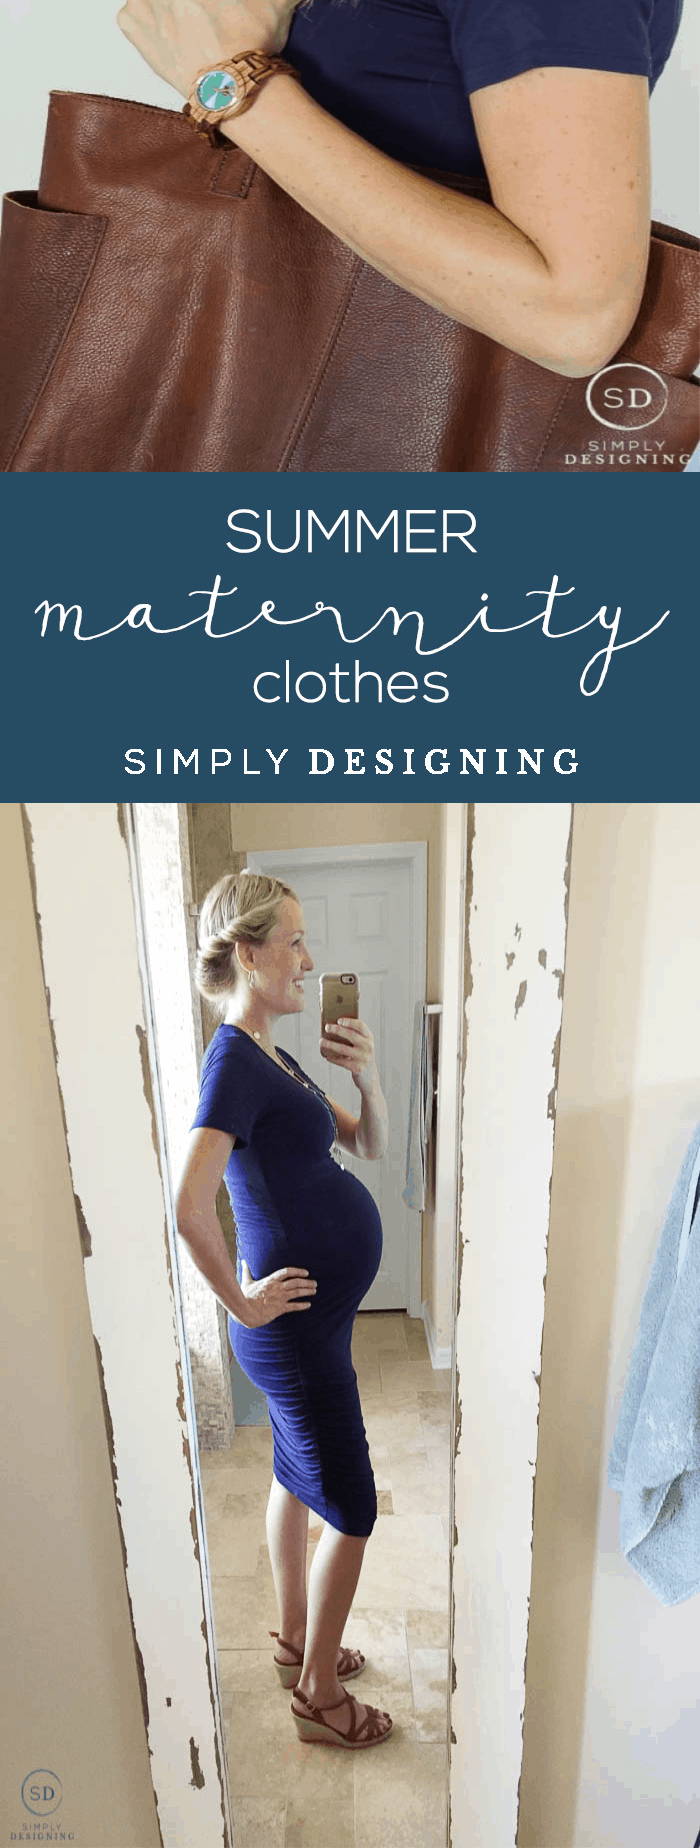 How to Look Your Best In Summer Maternity Clothes